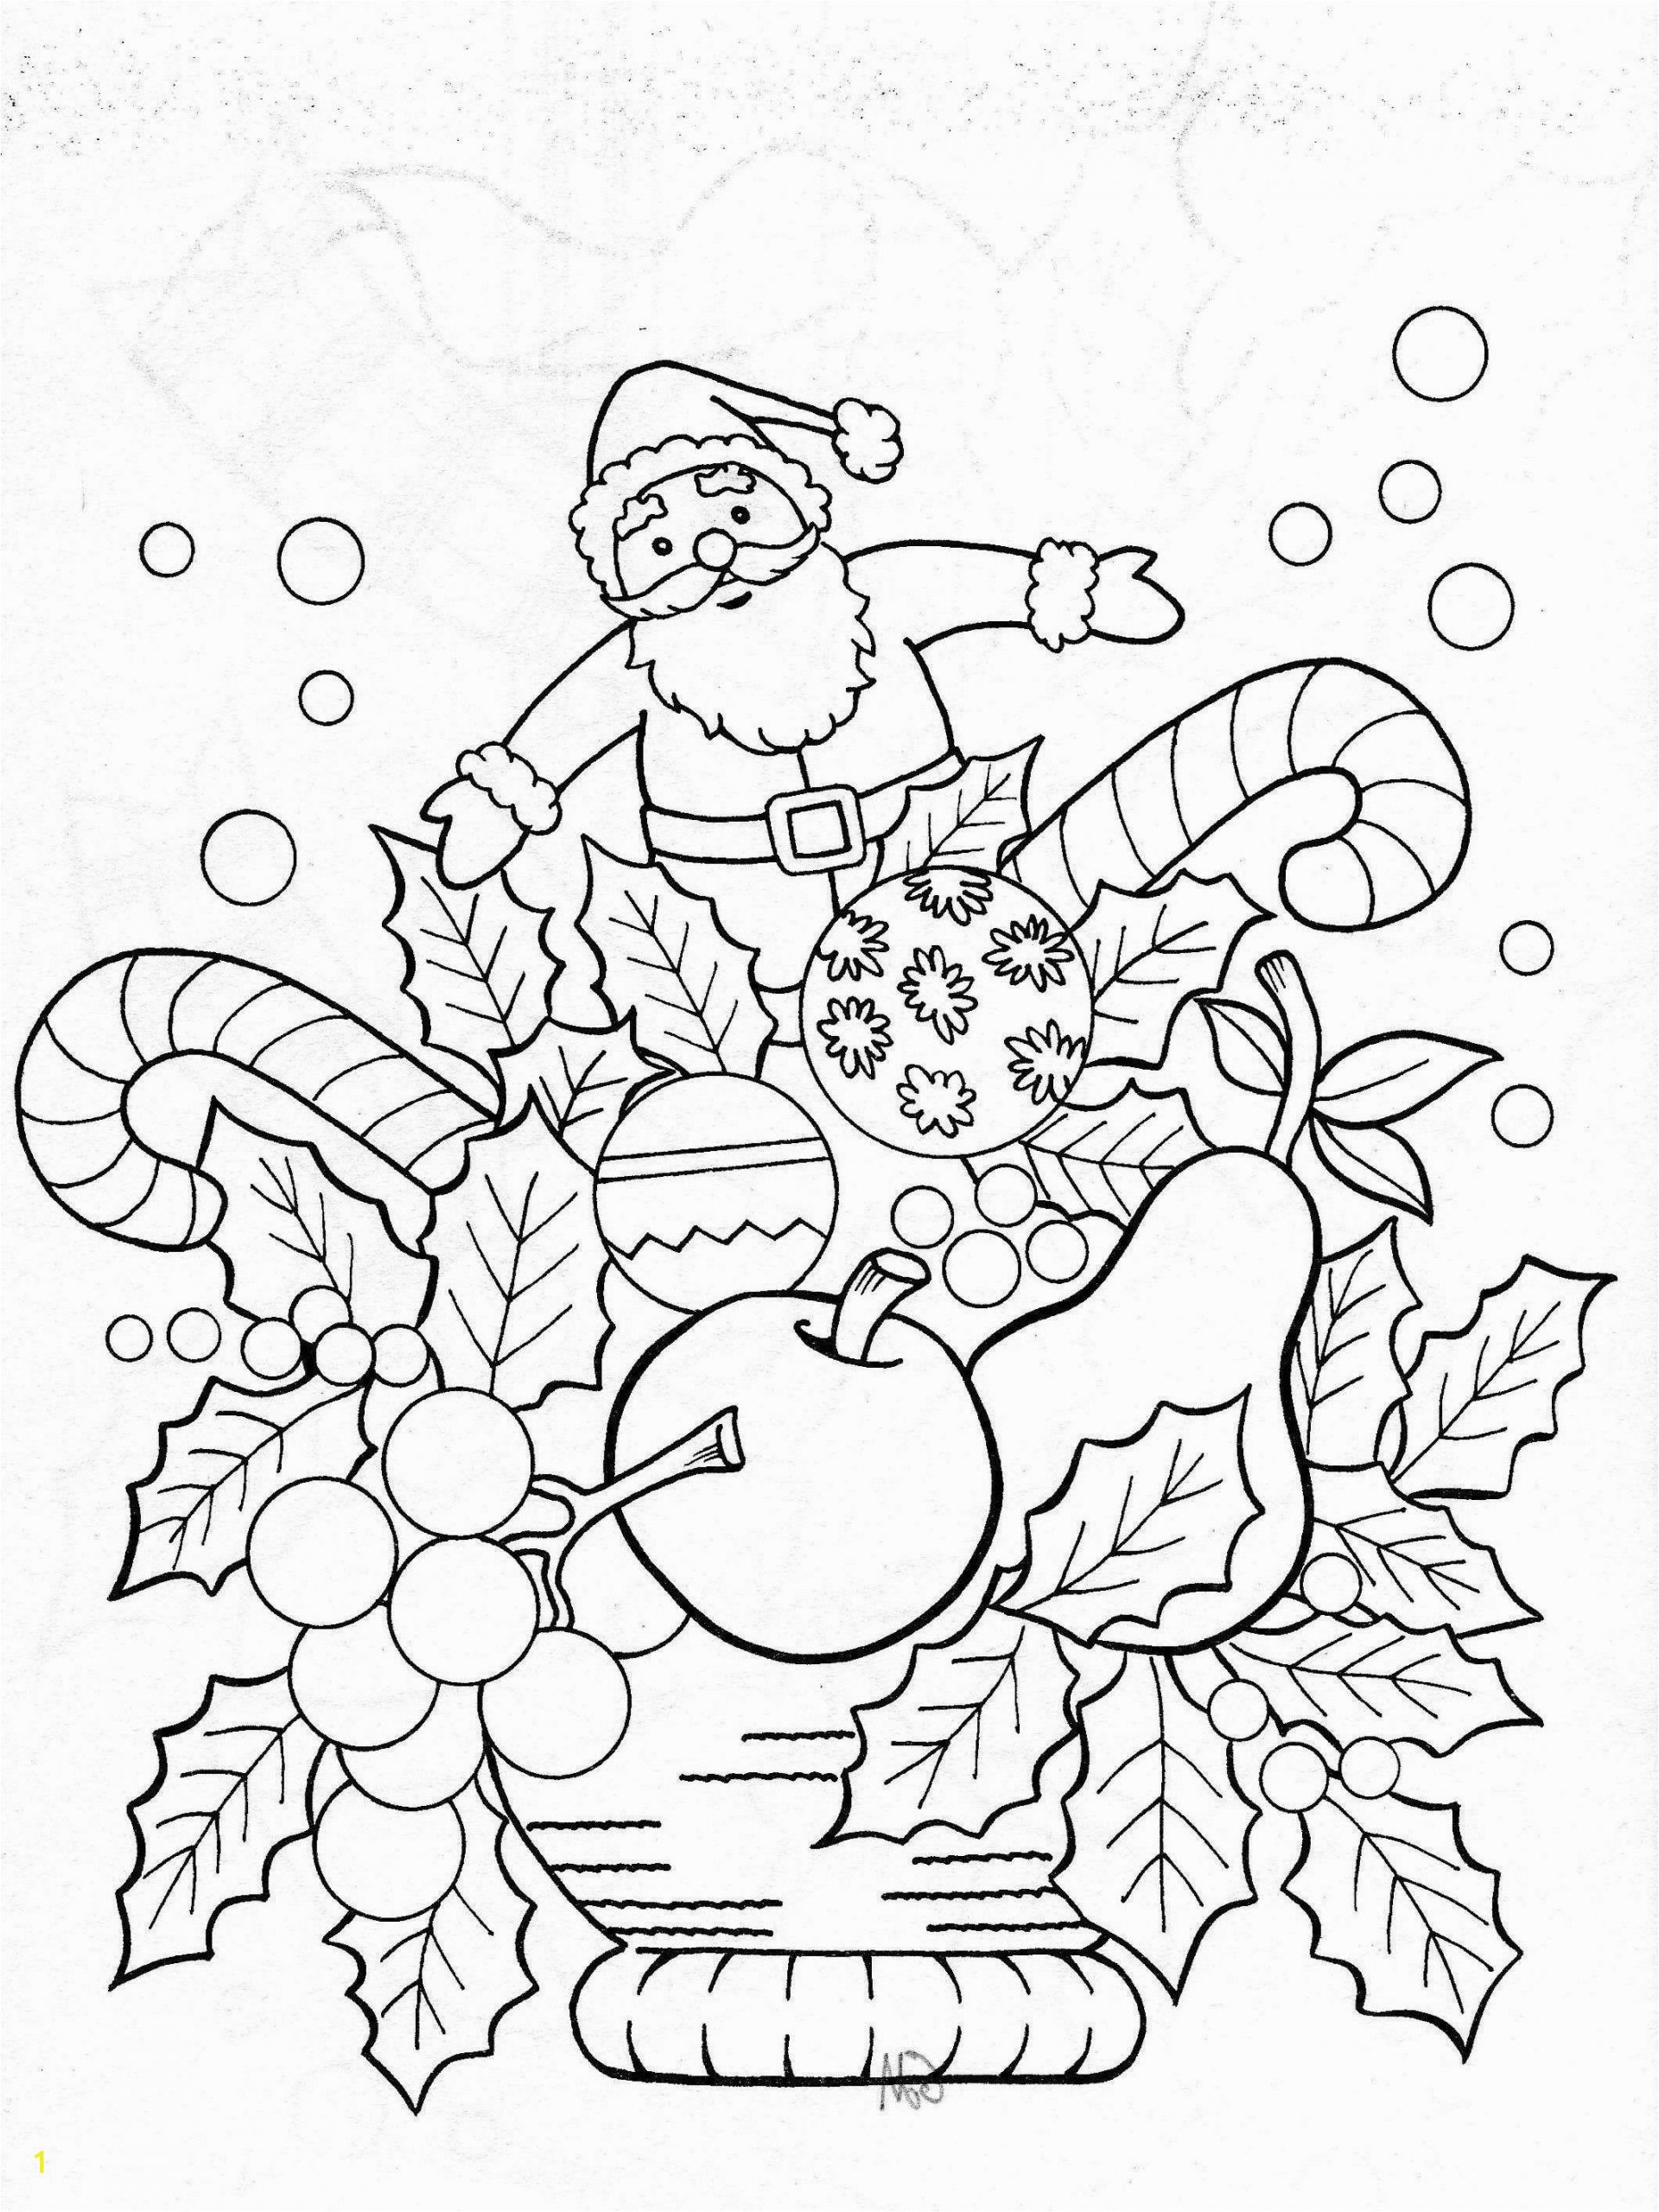 Coloring Pages You Can Print 28 Awesome Image Interesting Coloring Page Dengan Gambar